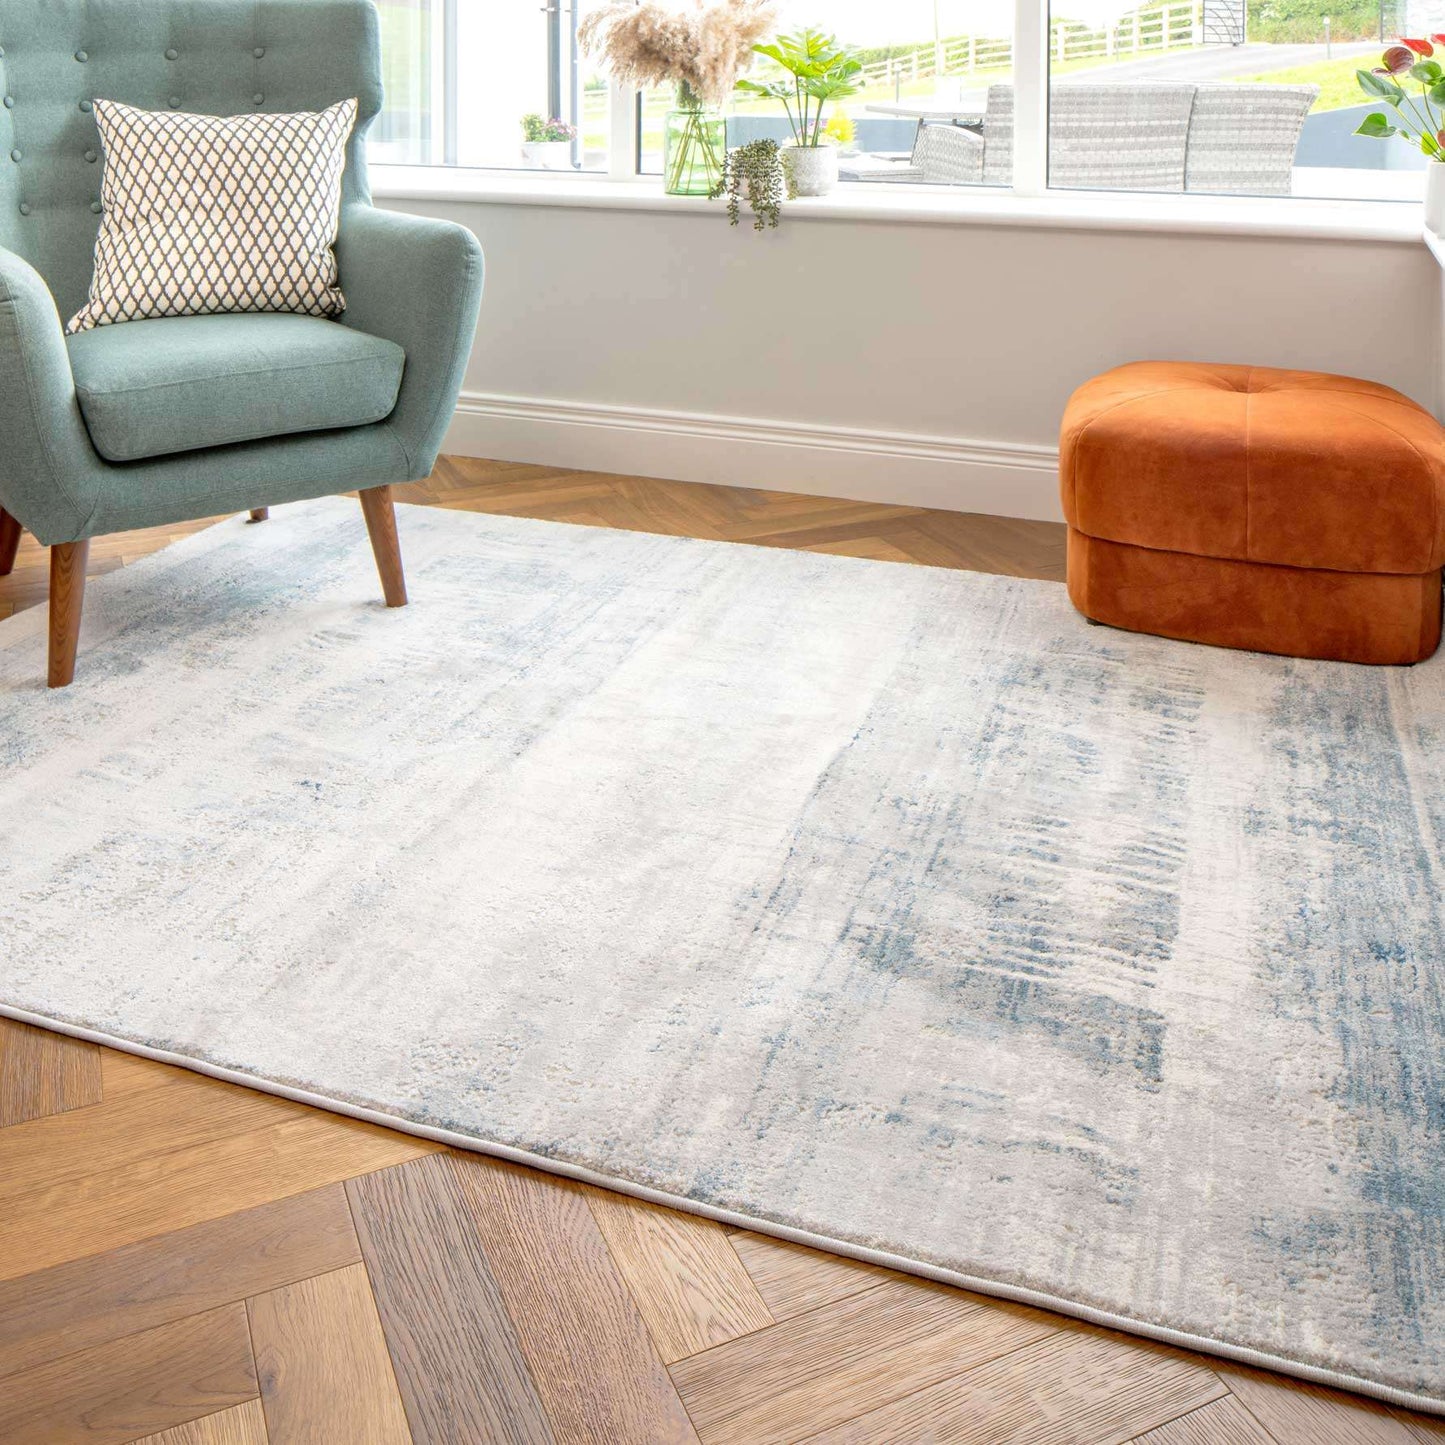 Soft Blue Distressed Abstract Living Room Area Rug